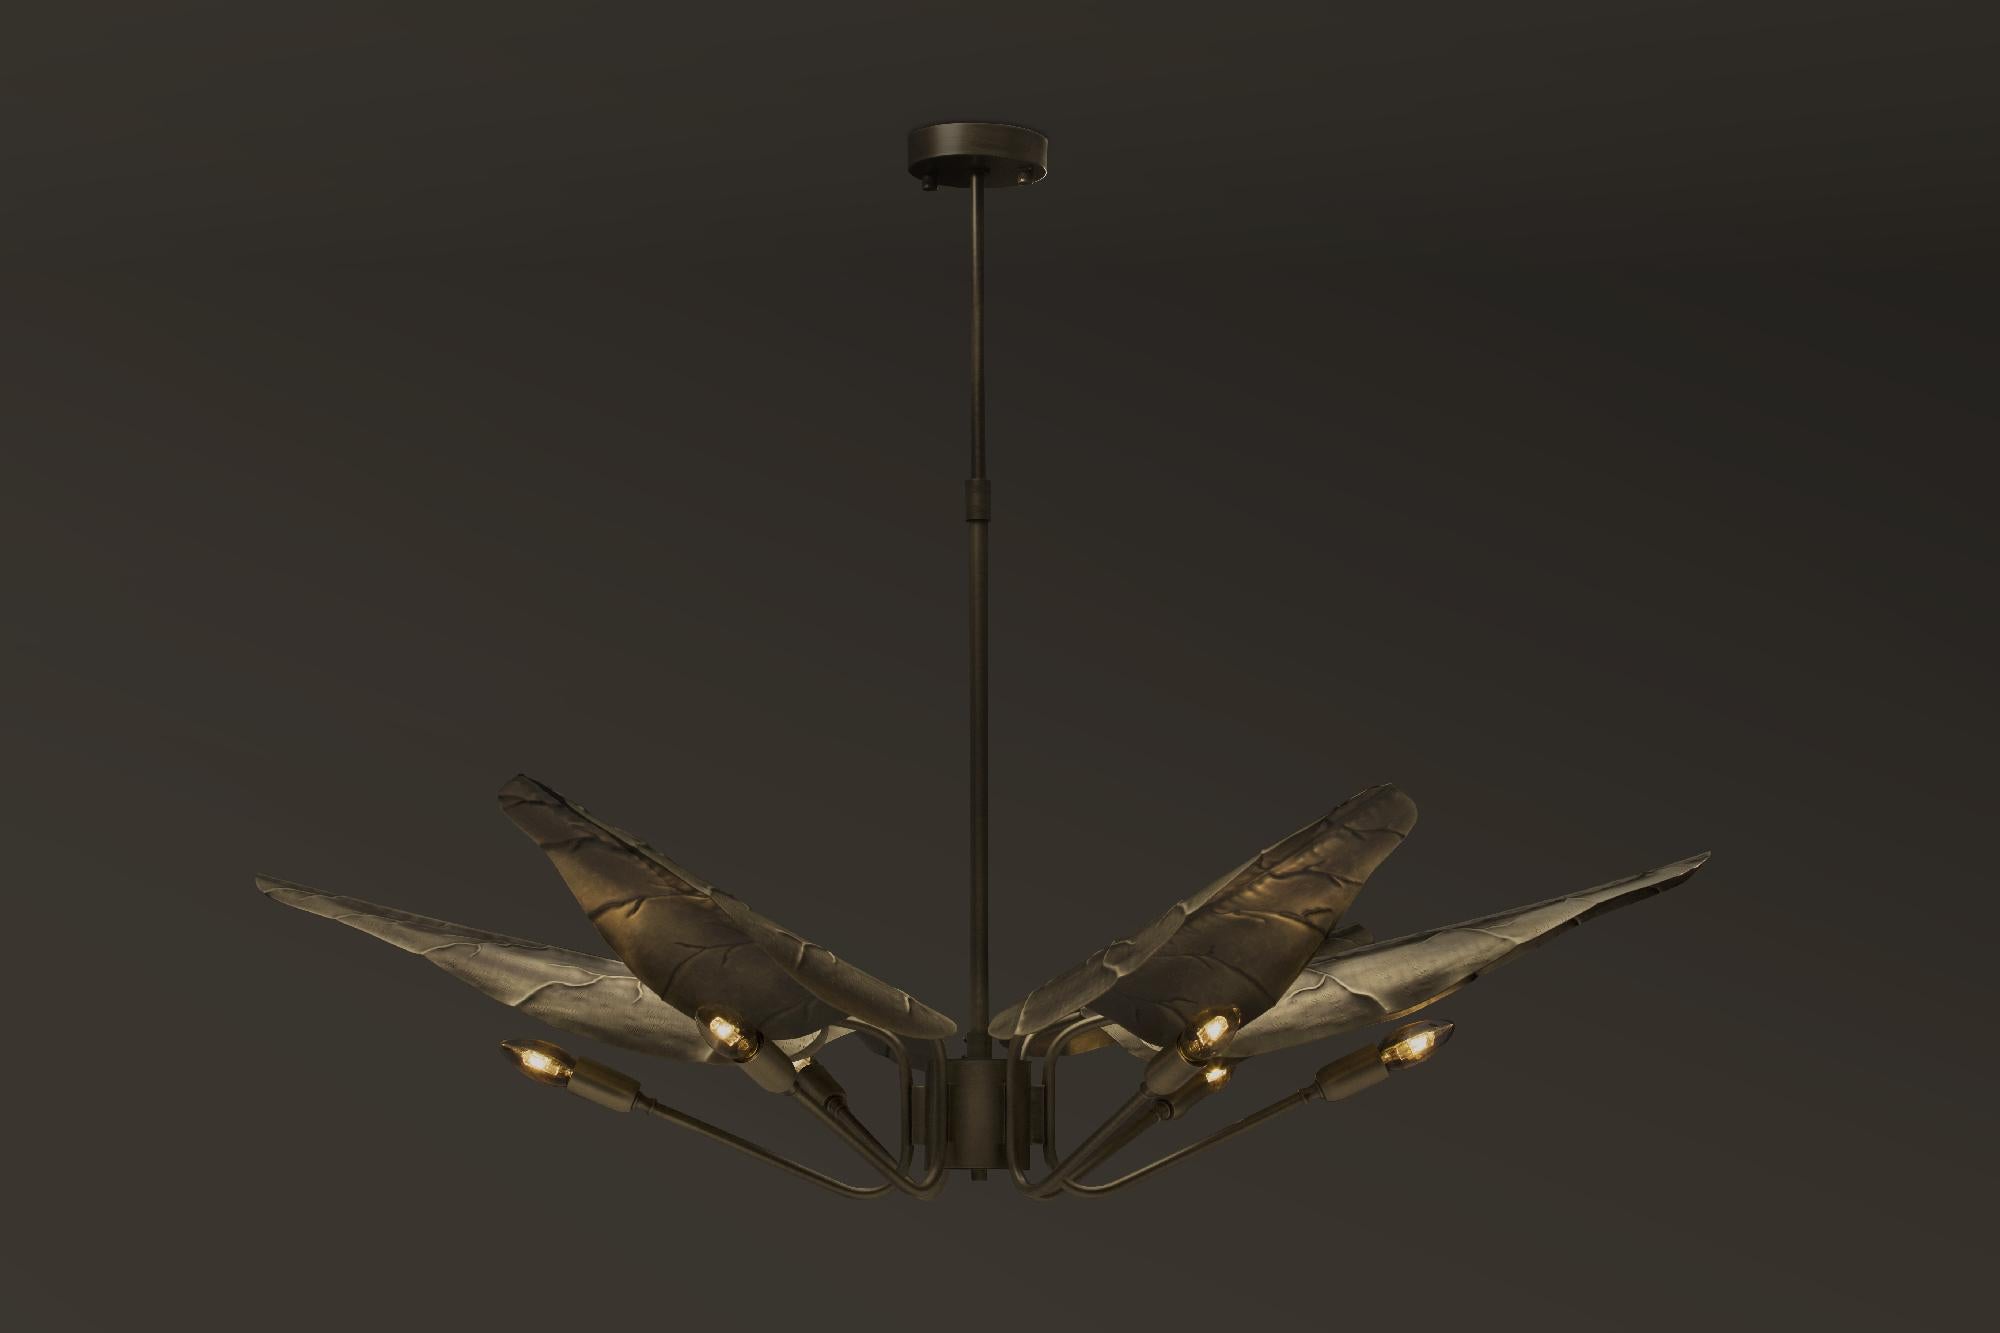 With origins in South Africa, Calla lily flower is one of the most graceful things nature has conceived. Inspired by its delicacy, our design team created Calla suspension light. With a gracefully aged brass top in the shape of elegant leafs, the